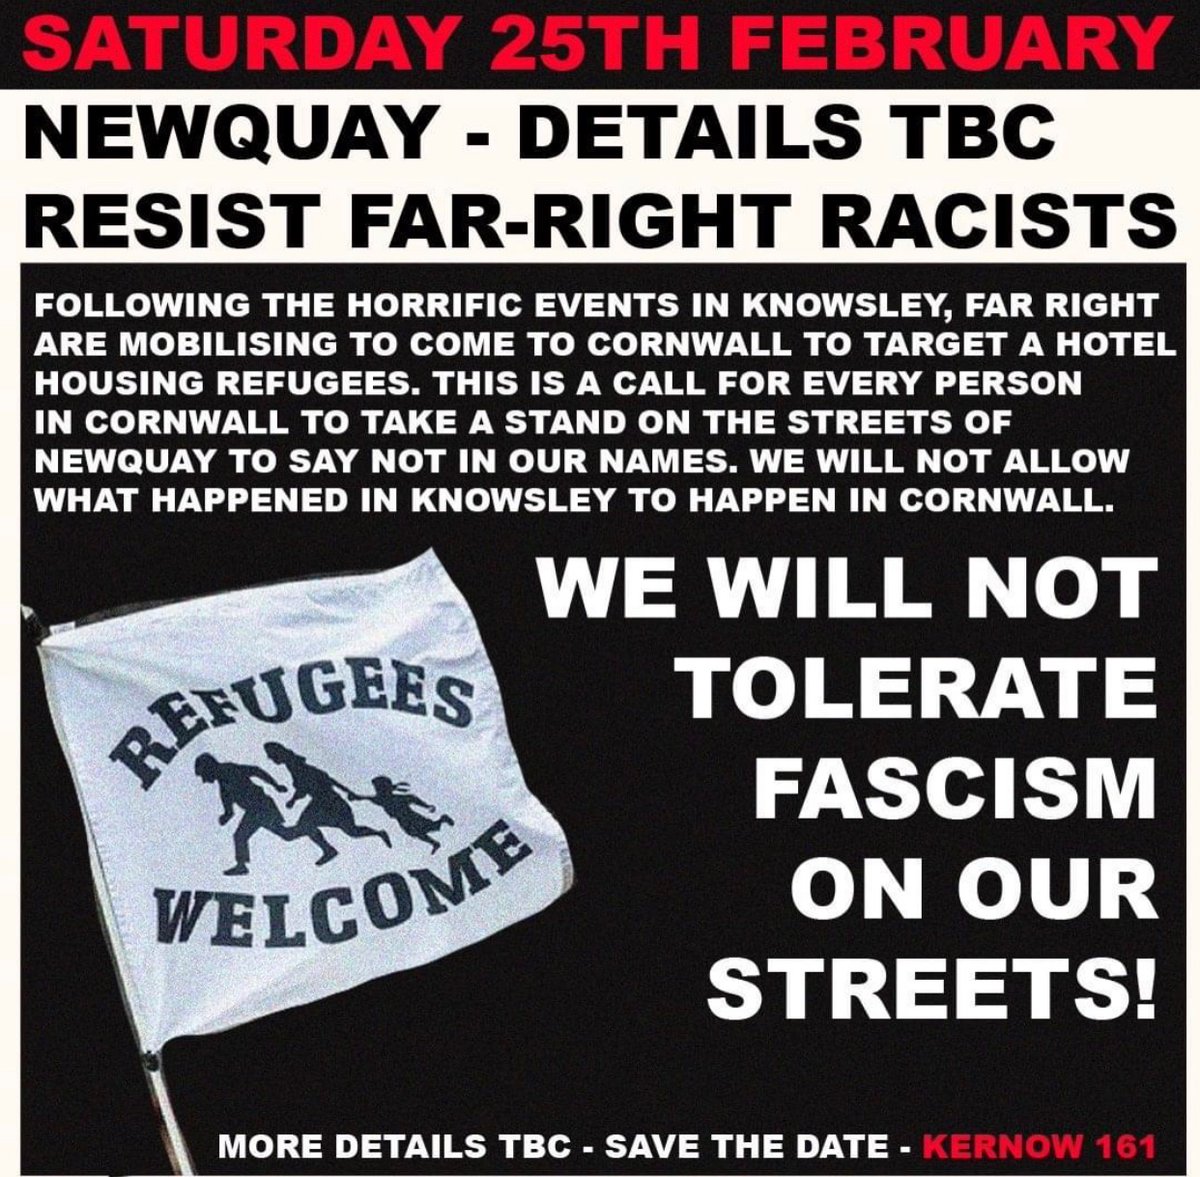 Let's show them we don't want their division and hate here. Cornwall let's mobilise! #cornwall #newquay #antifacist #refugeeswelcome. #antiracism